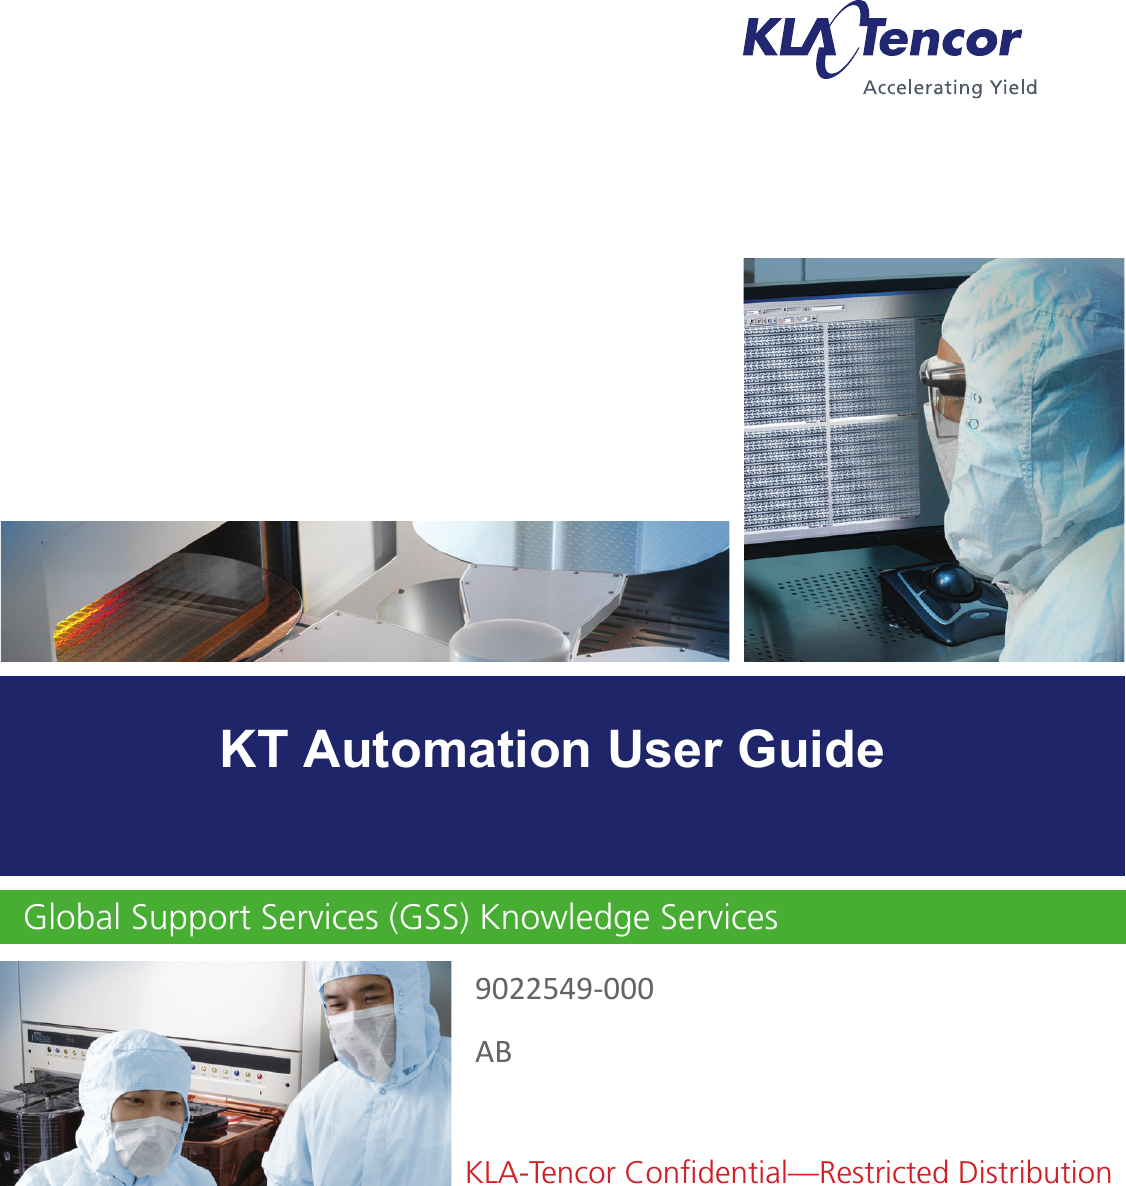 Global SVQQPSU SFSWJDFT (GSS) Knowledge ServicesKLA-Tencor Conﬁdential—Restricted Distribution9022549‐000ABKT Automation User Guide